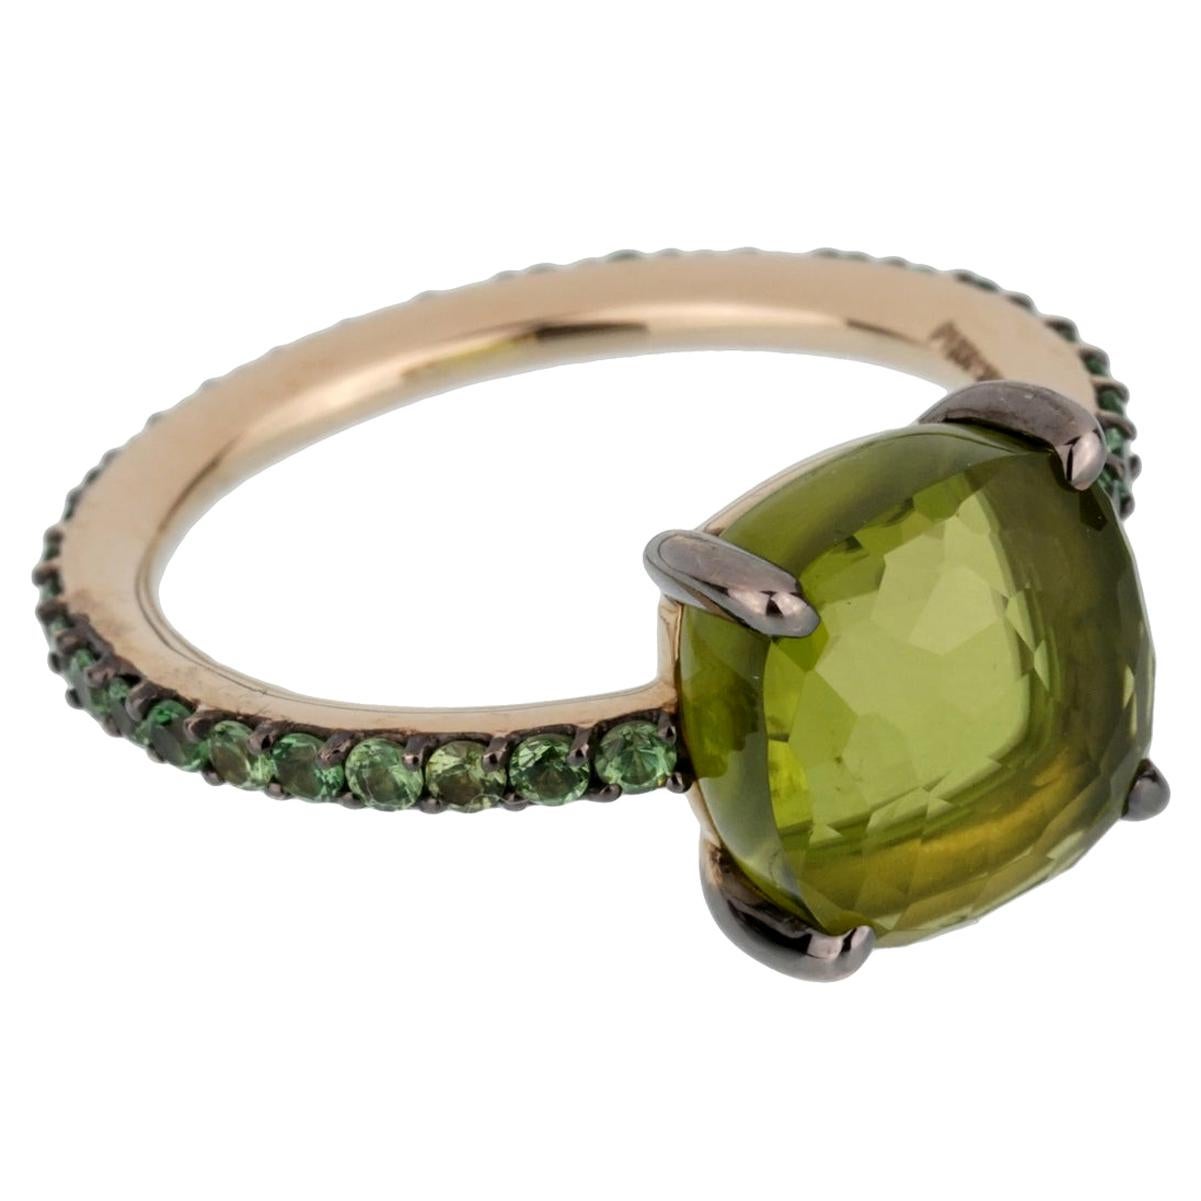 A fabulous brand new Pomellato cocktail ring showcasing a 3.56ct Peridot surrounded by .61ct of brilliant round tsavorite garnets set in 18k white gold. The ring size is 6.25.

Pomellato Retail Price: $10,500
Sku:2445
